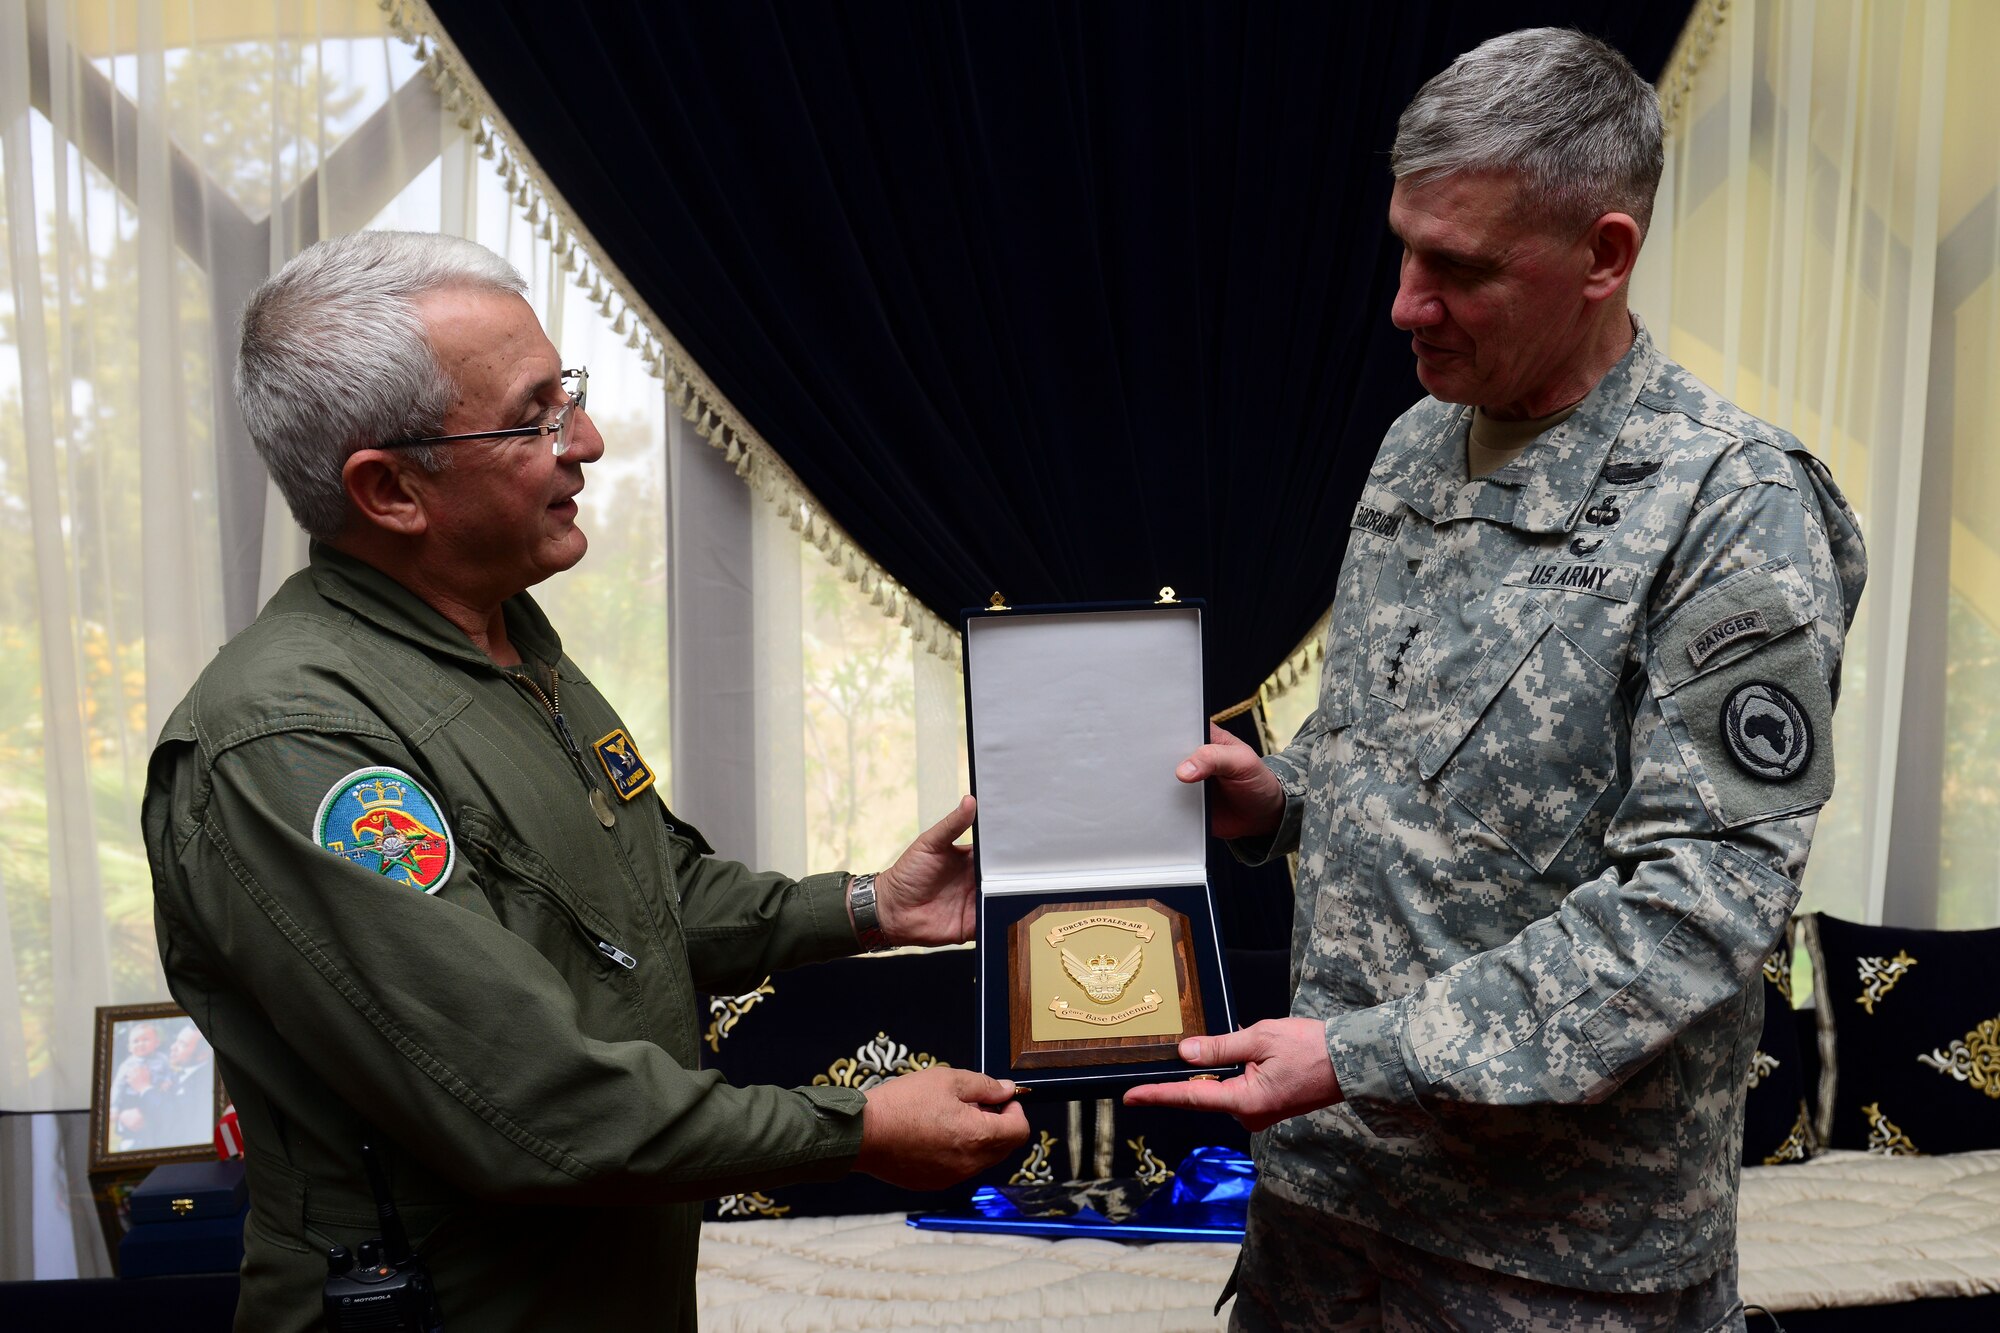 The Royal Moroccan Air Force Ben Guerir base commander, presents Gen. David Rodriguez, Africa Command commander, with a gift during a lunch meeting at Ben Guerir Air Base, Morocco, May 20, 2015. Rodriguez received a base tour and an briefing on the joint Exercise African Lion air training exercise. African Lion is an annually-scheduled, combined. U.S. -Moroccan exercise designed to improve interoperability and mutual understanding of each other’s tactics, techniques and procedures while demonstrating the strong bond between the two nation’s militaries. (U.S. Air Force photo by Staff Sgt. Eboni Reams/Released)